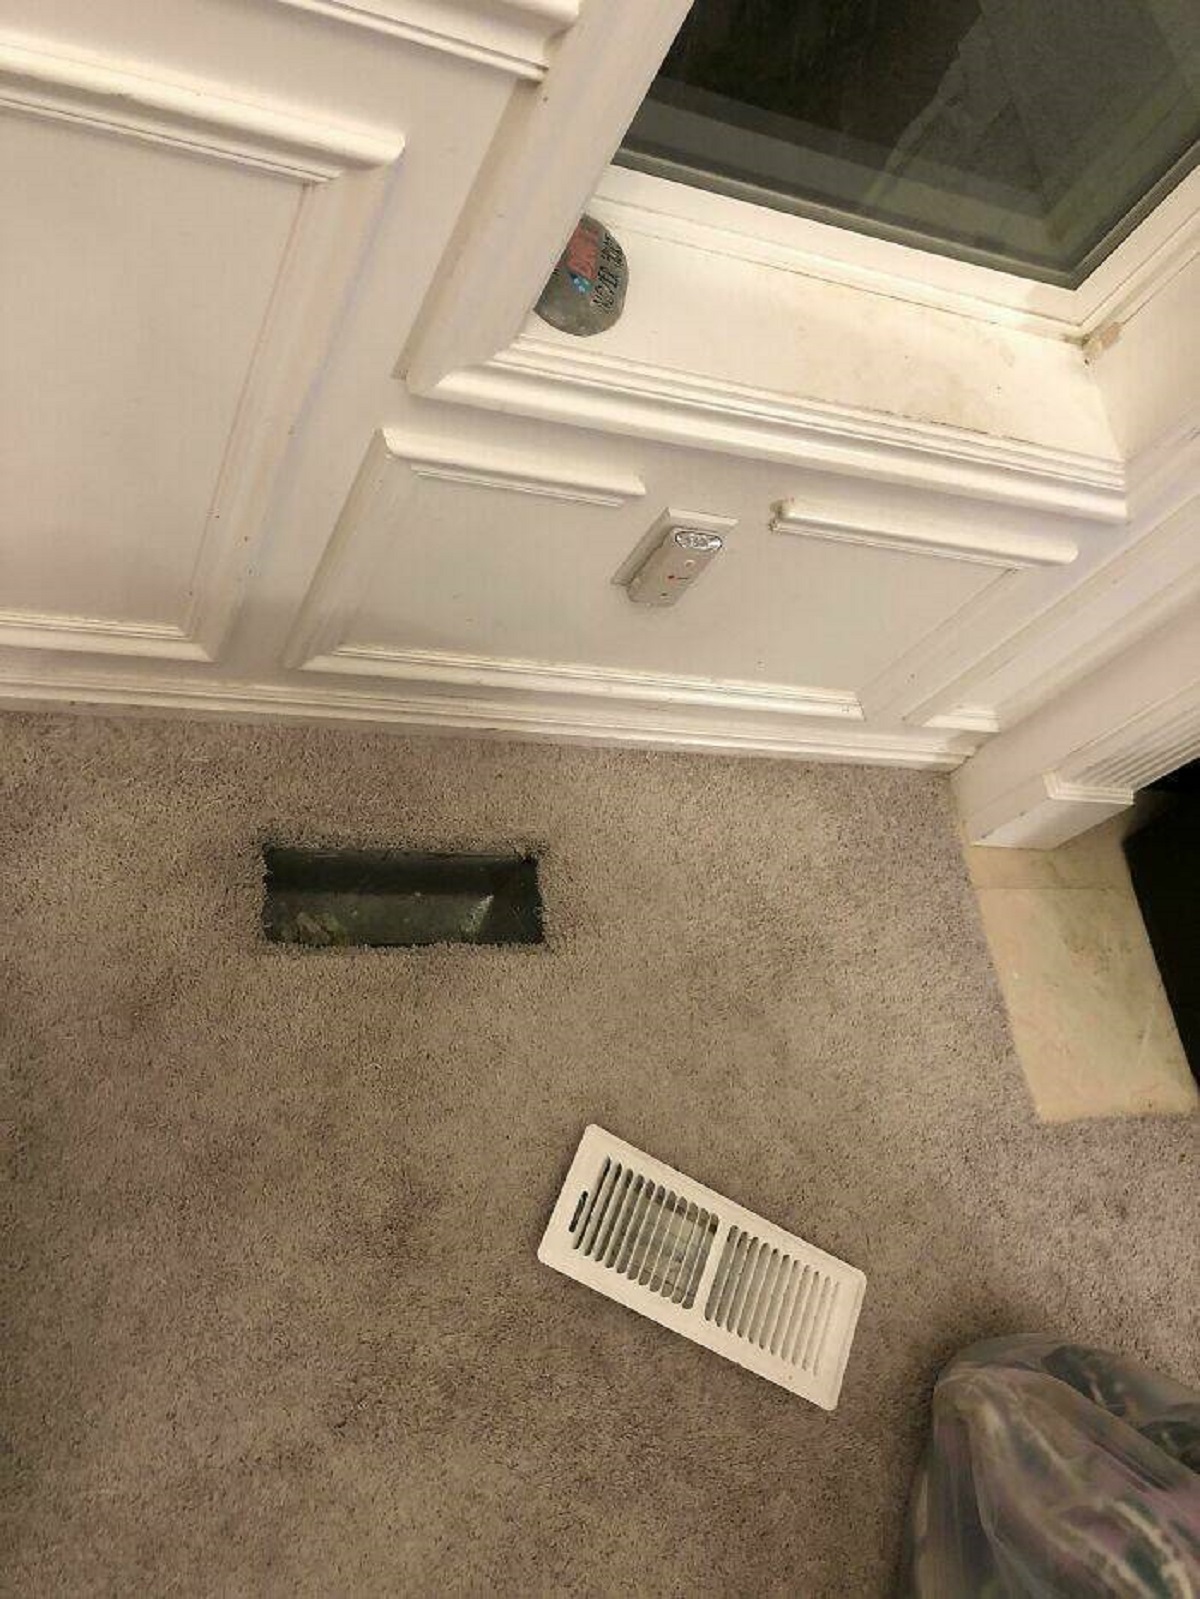 "Got Home Late From Work To Find My Entryway Vent Like This"